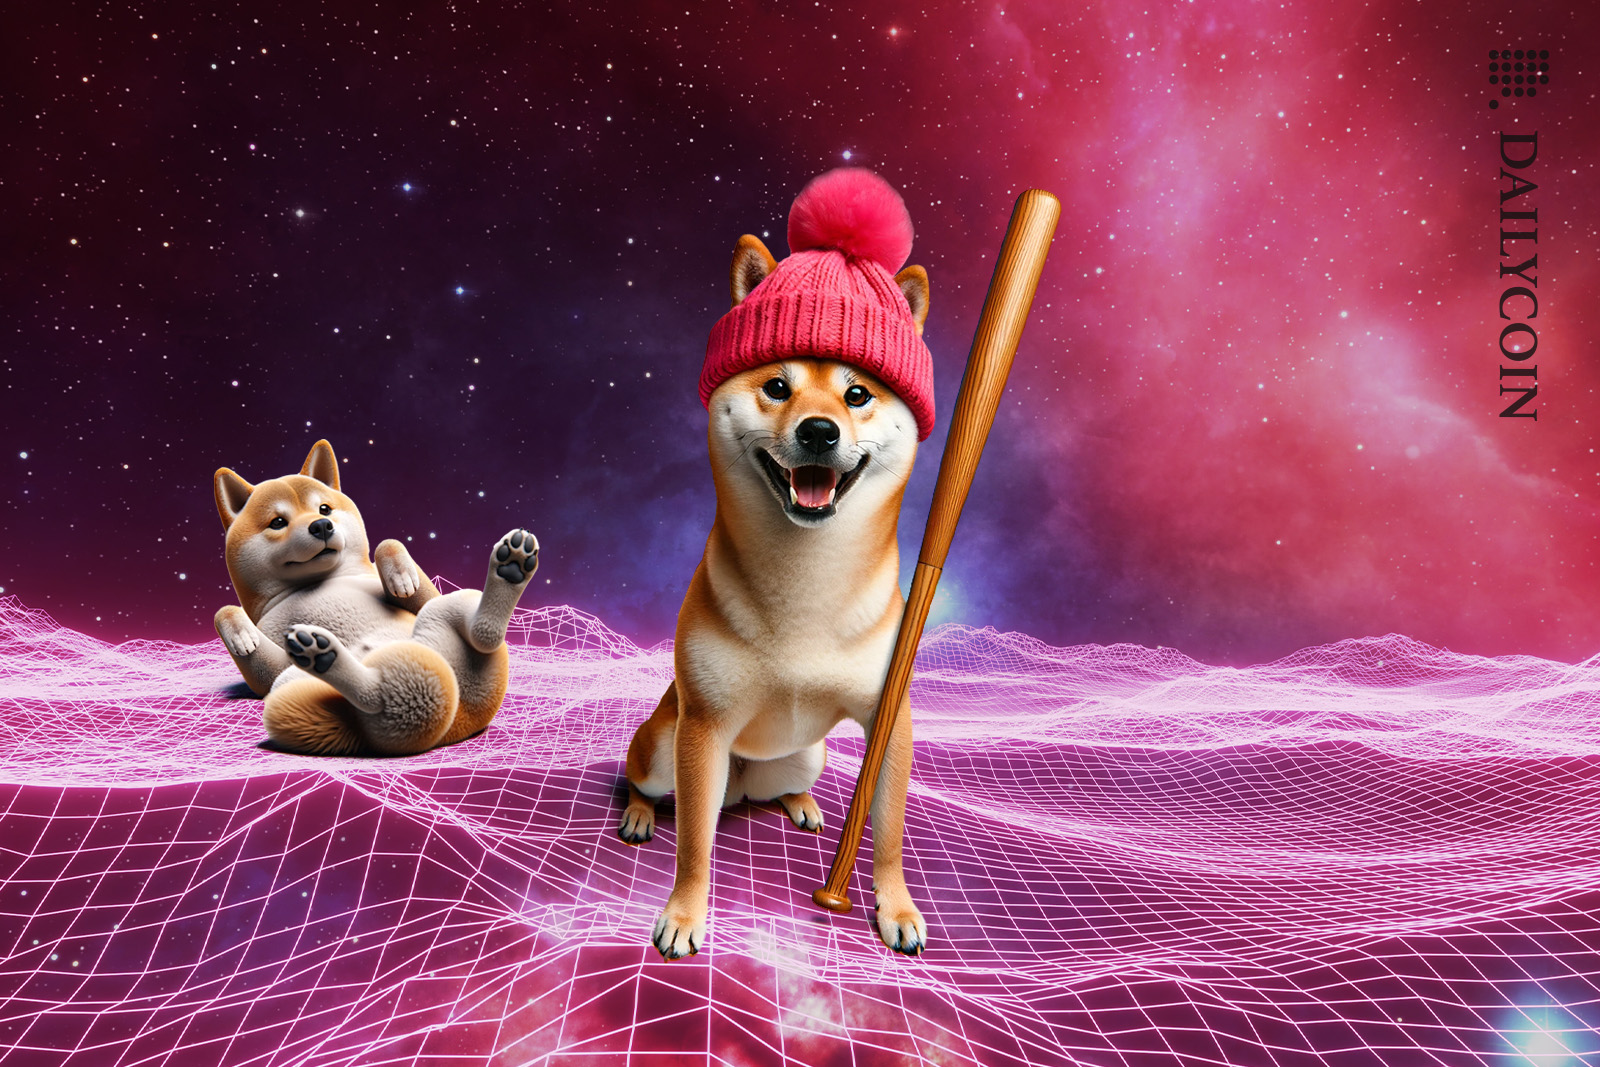 Woolly hat Shiba Inu took a baseball bat of the other shib behind him who is now laying on the ground.